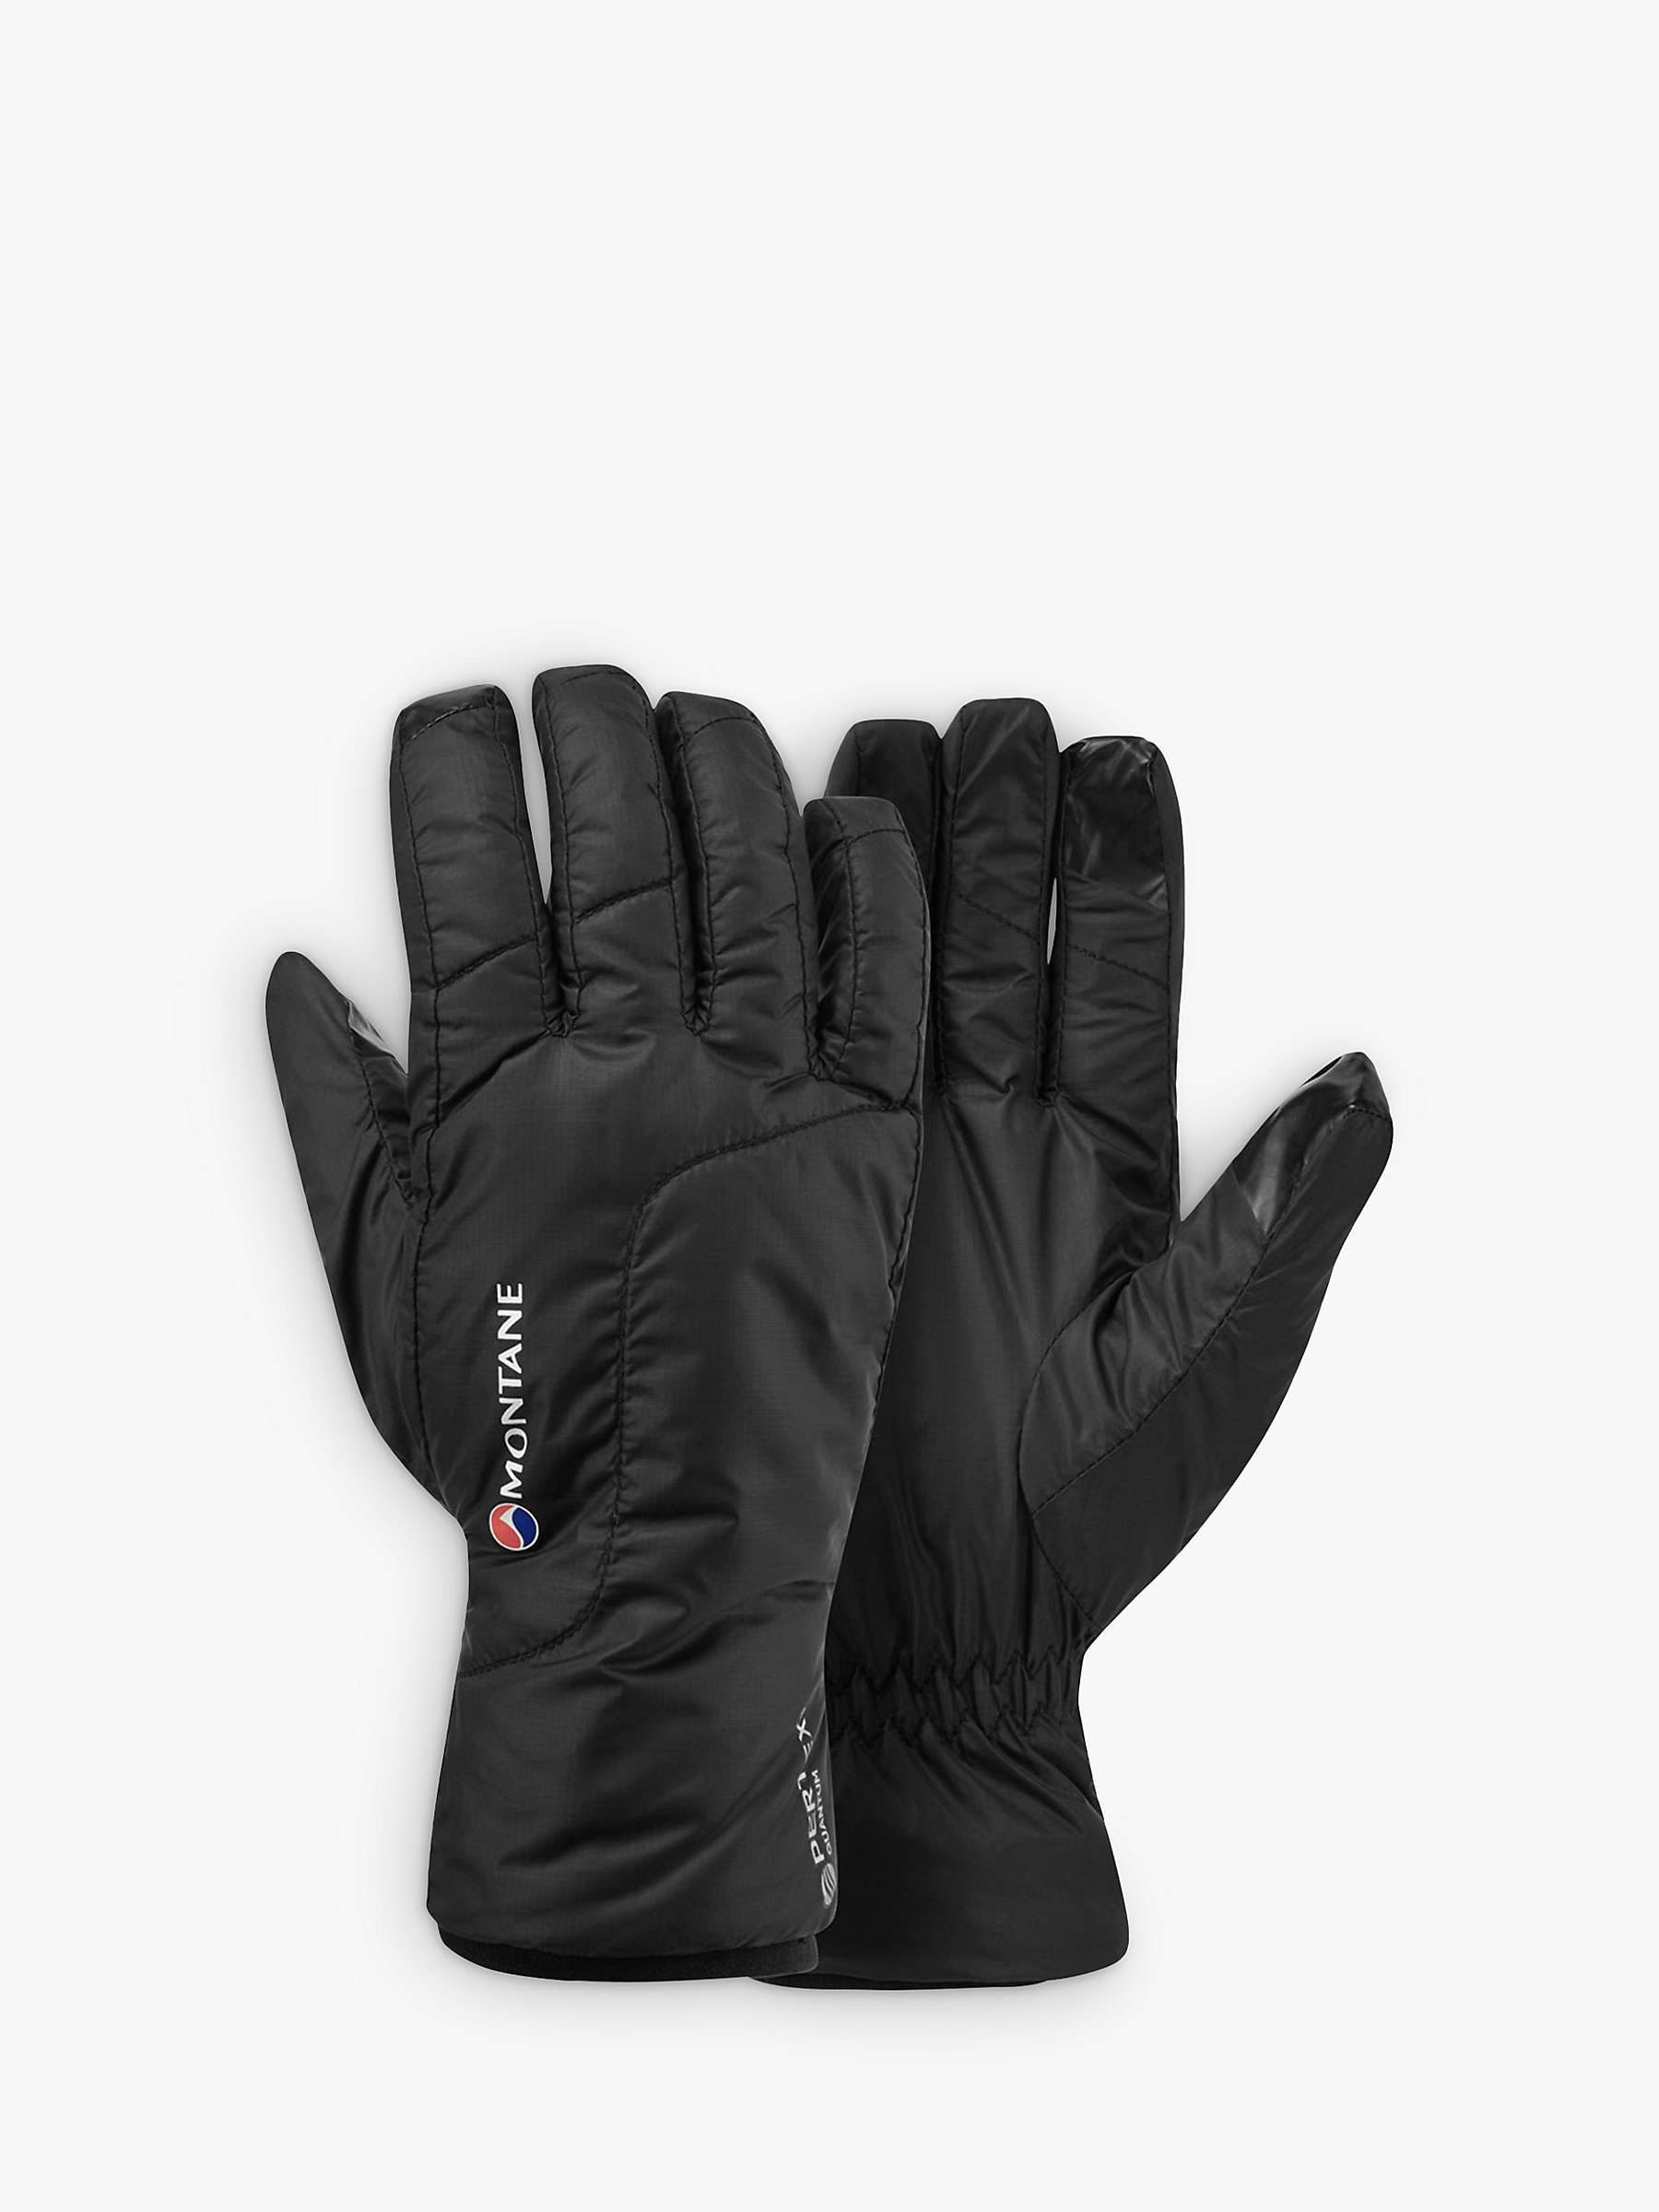 Buy Montane Women's Prism Insulated Gloves, Black Online at johnlewis.com